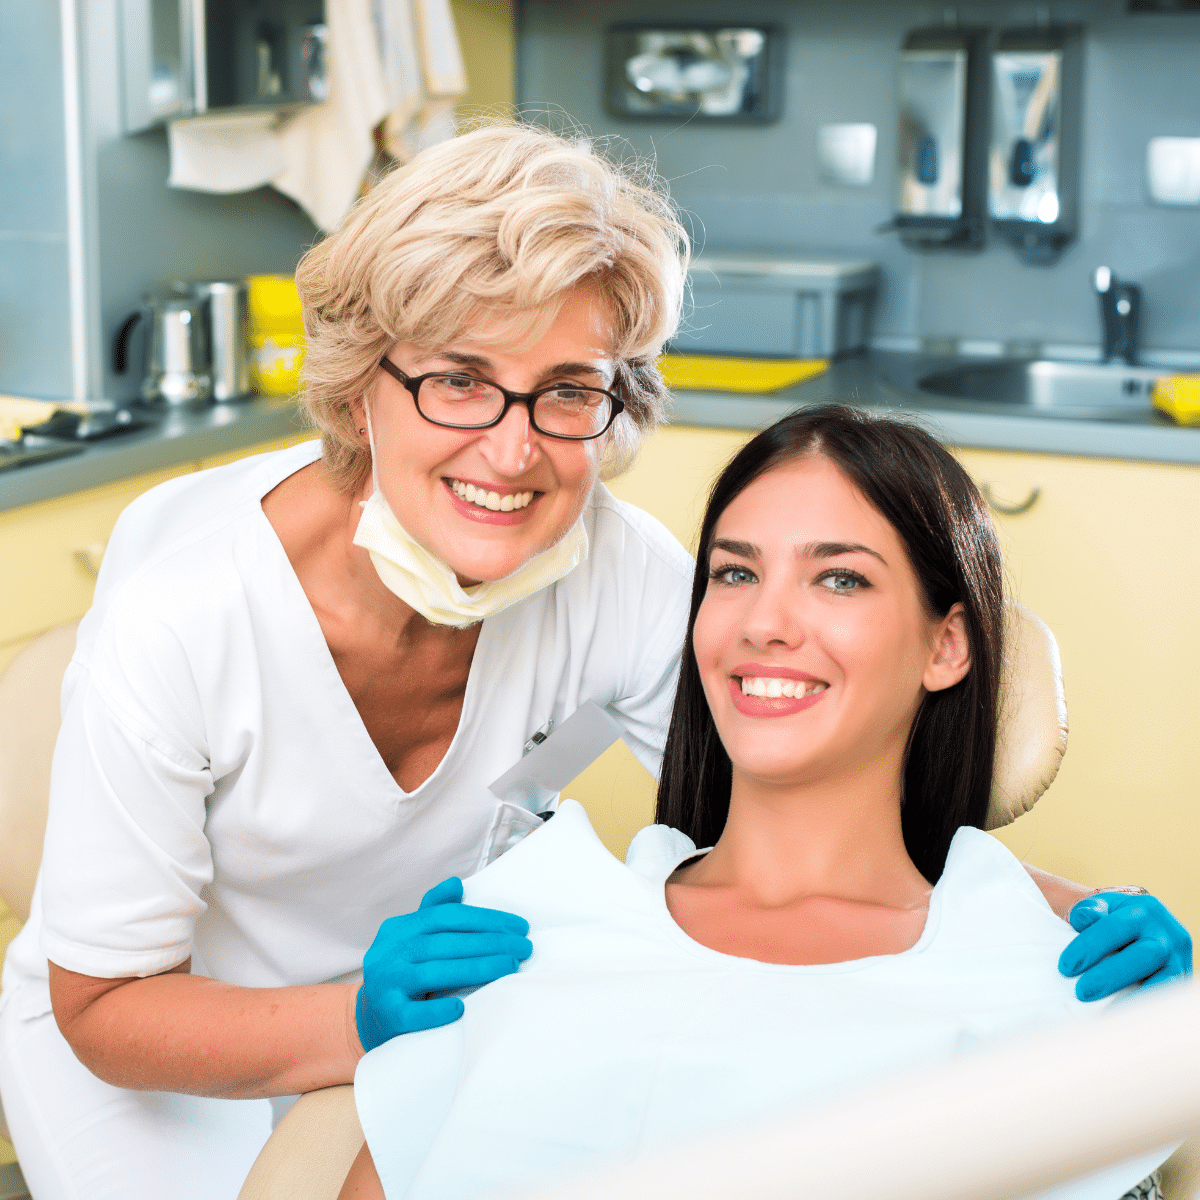 photo of dentist and happy patient who found her thanks to quality dental practice website design.